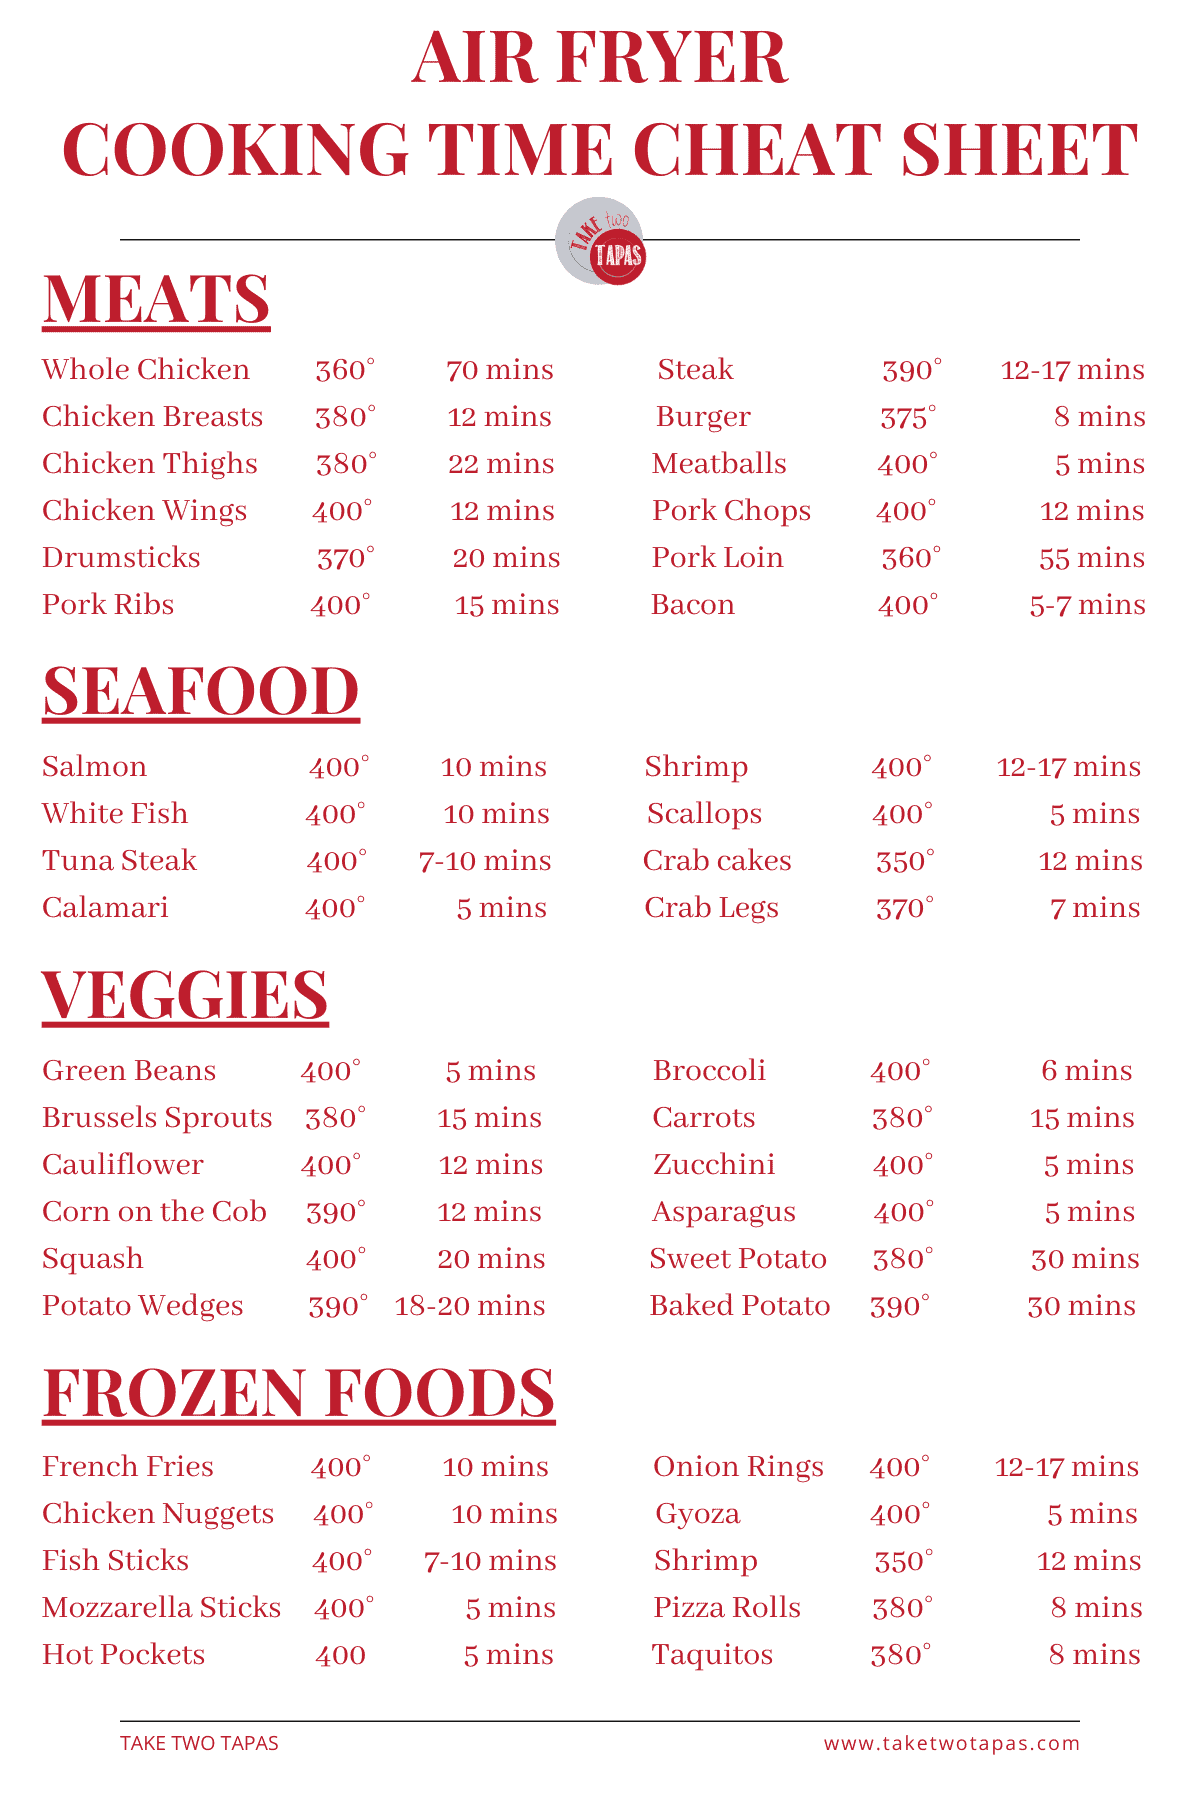 https://www.taketwotapas.com/wp-content/uploads/2022/11/AIR-FRYER-COOKING-TIME-CHEAT-SHEET.png